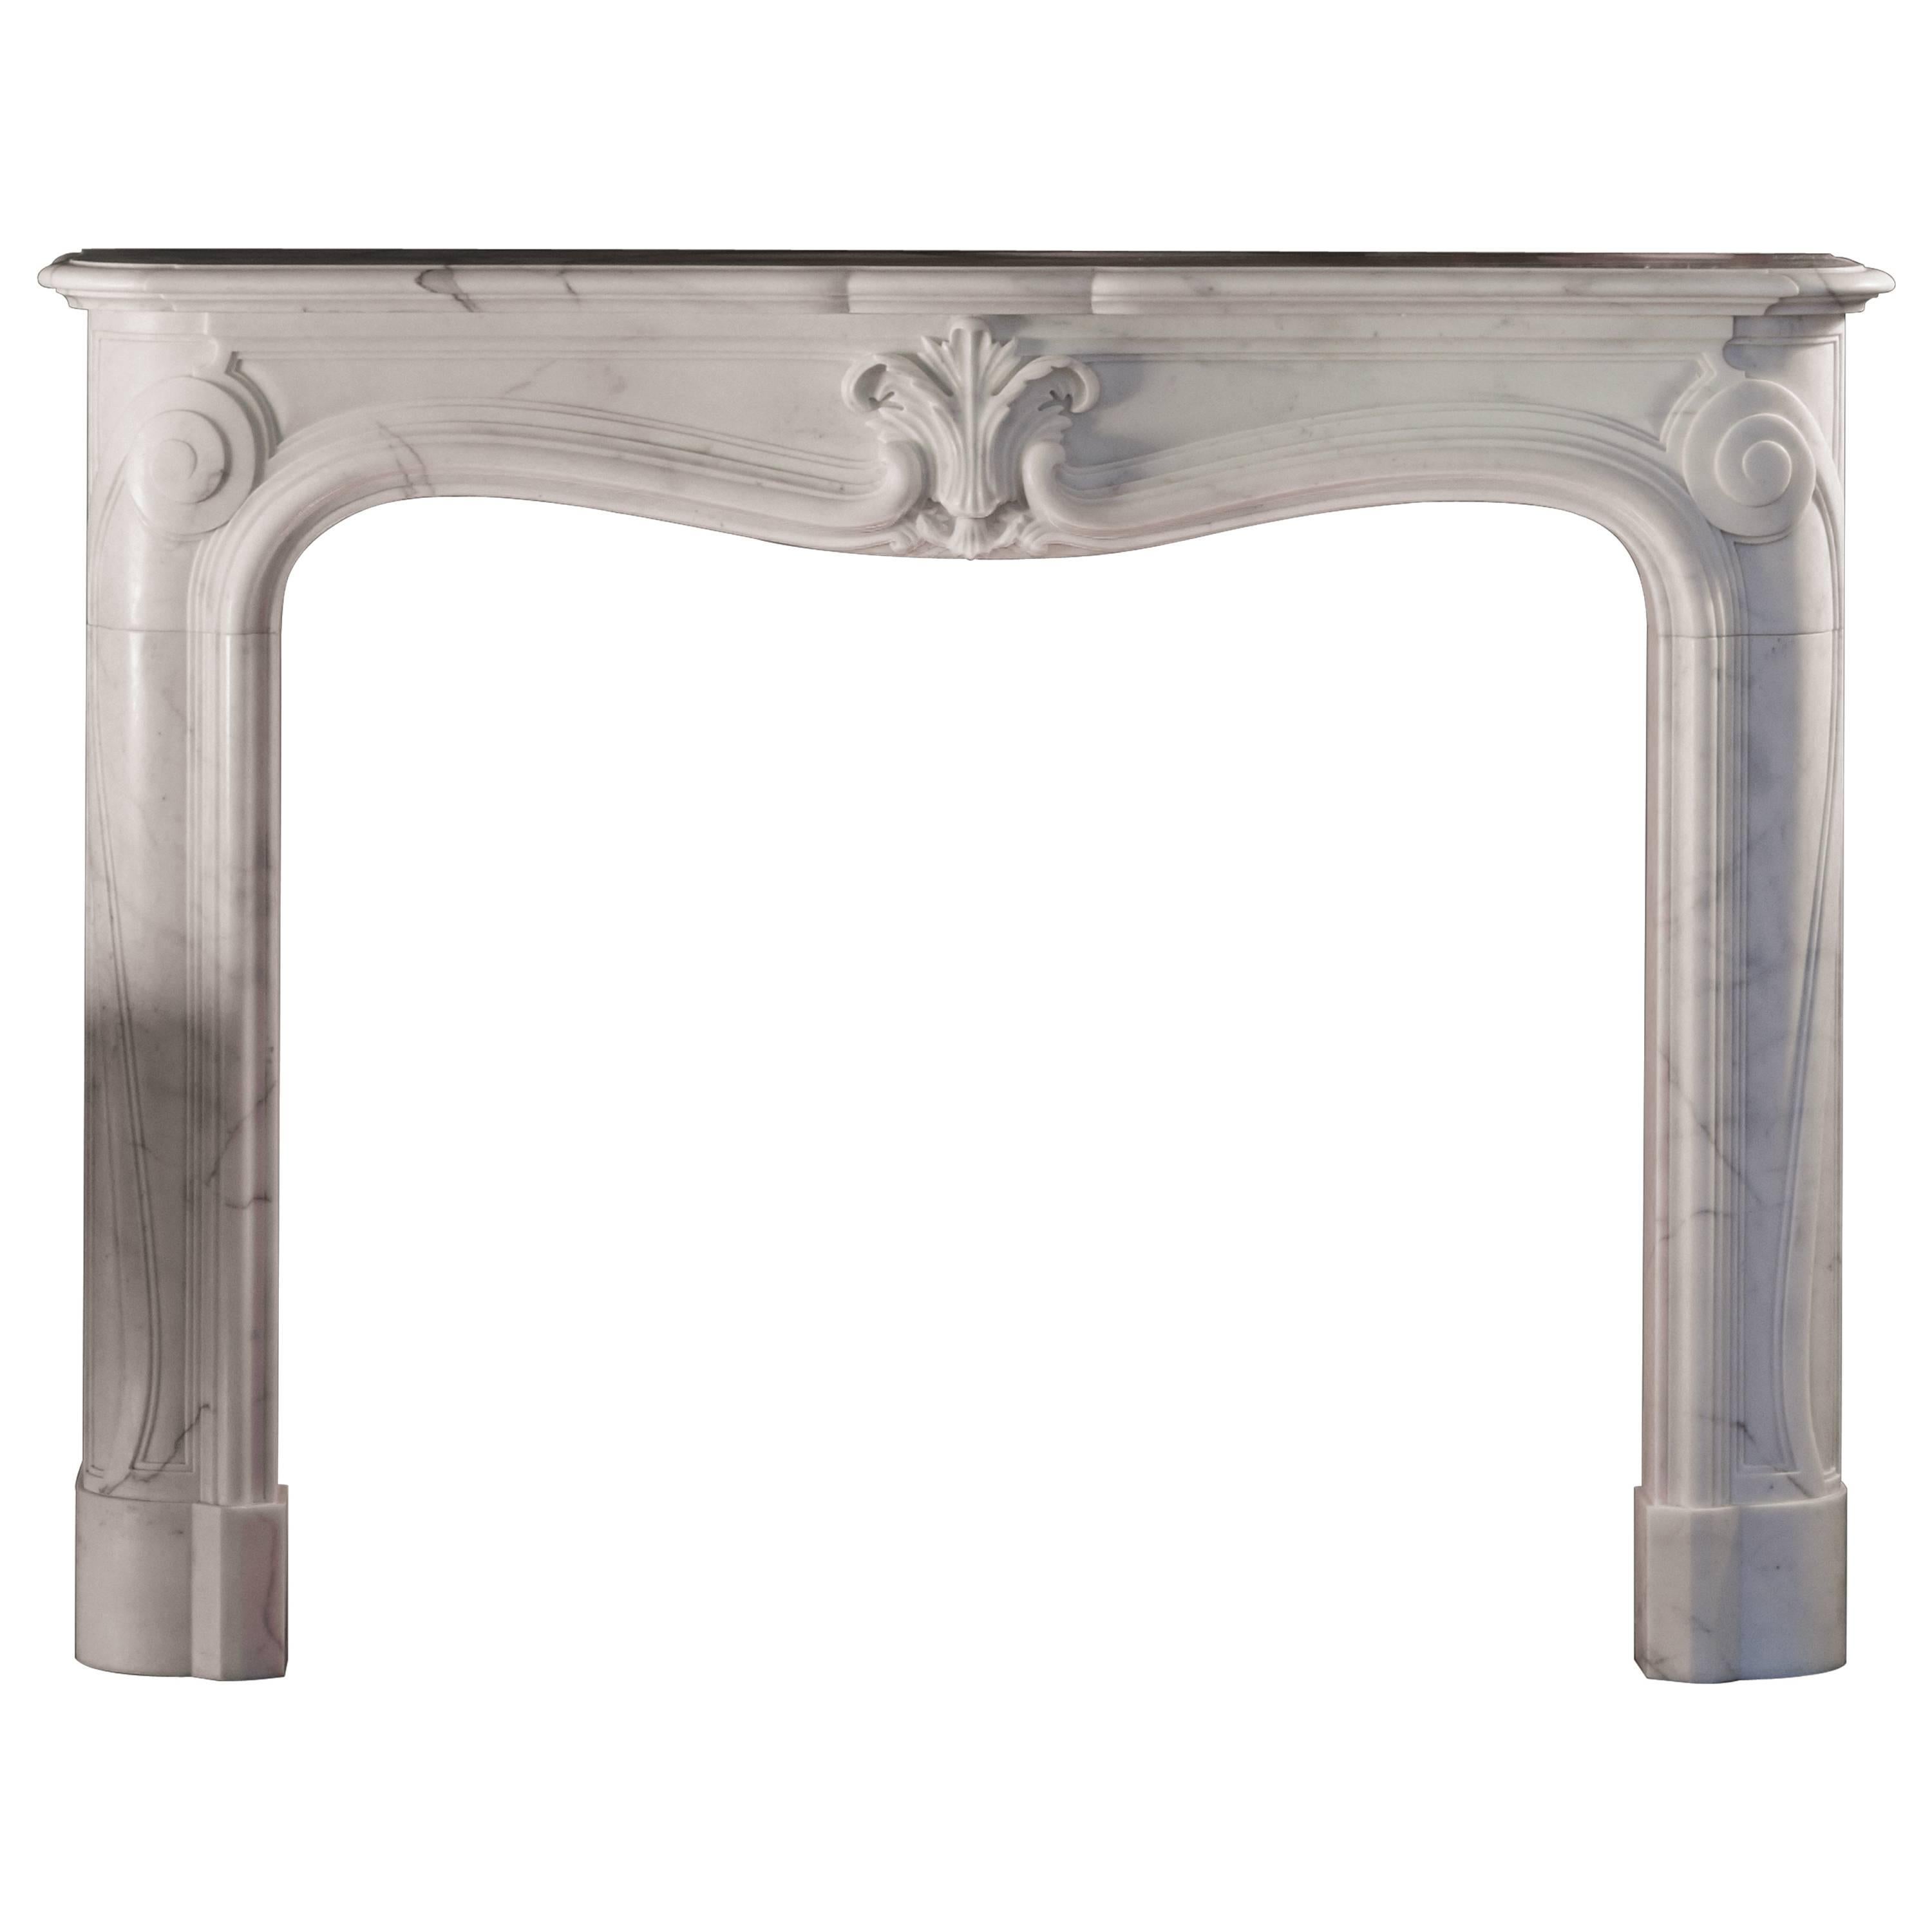 18th Century Reproduction Louis XV Mantel in Statuary Marble